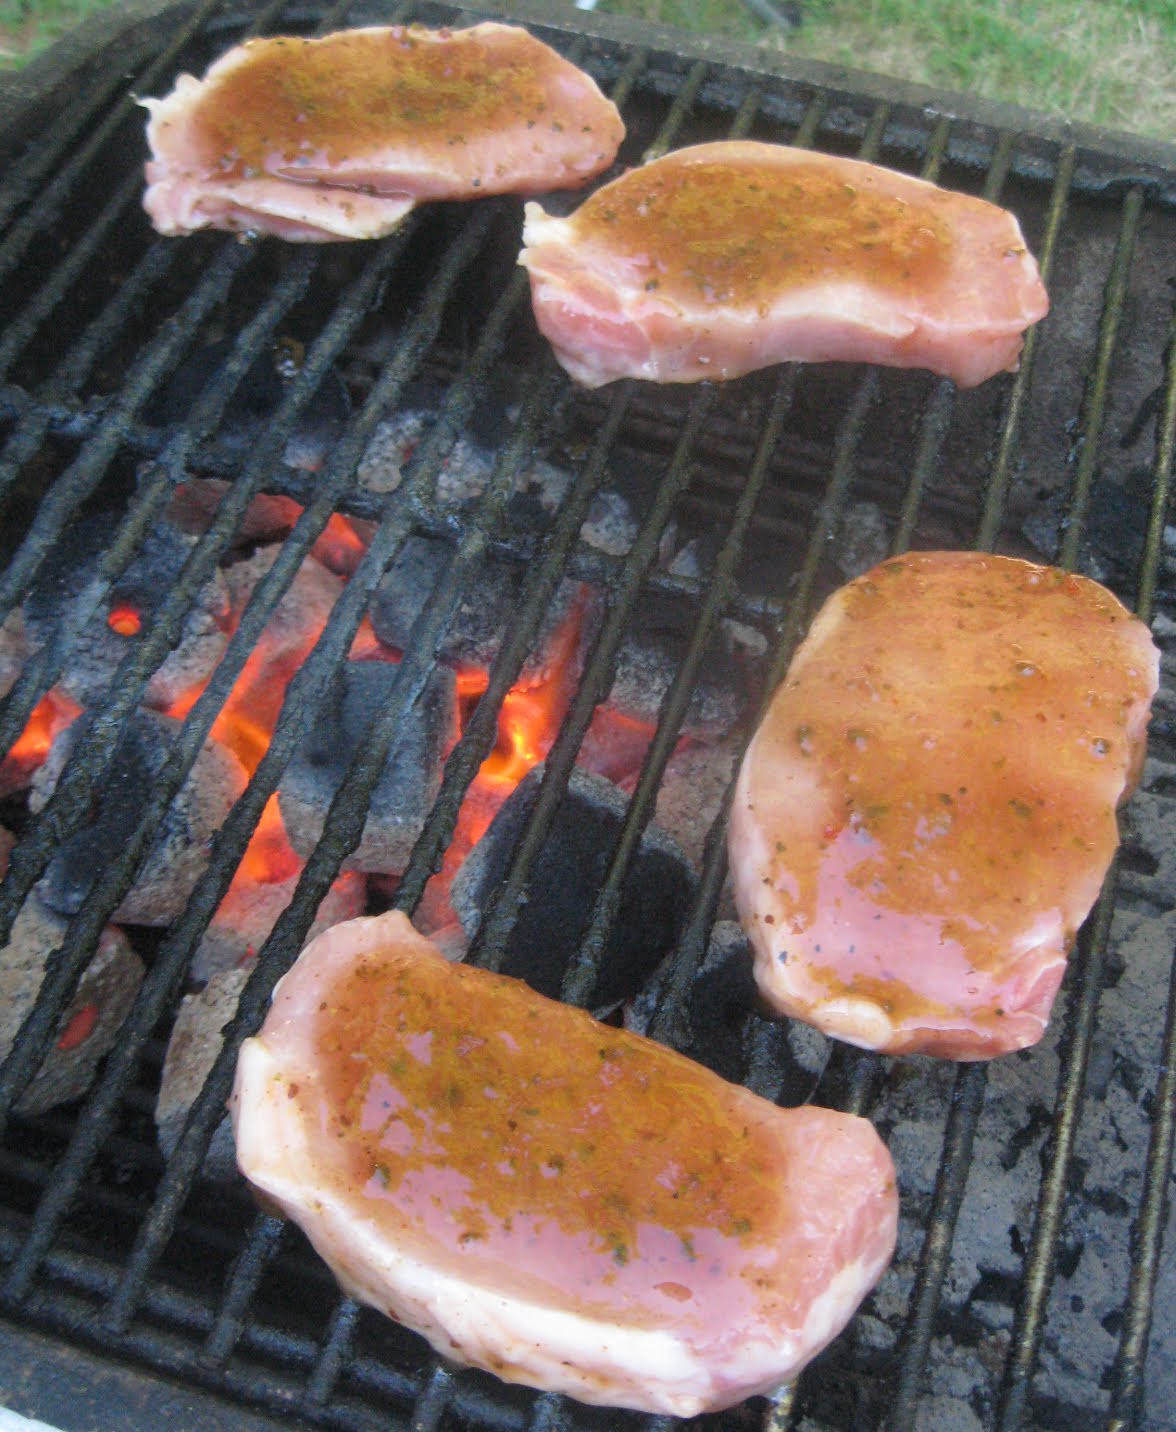 Boneless Pork Chops On The Grill
 Barbecue Master How to Grill Boneless Pork Chops